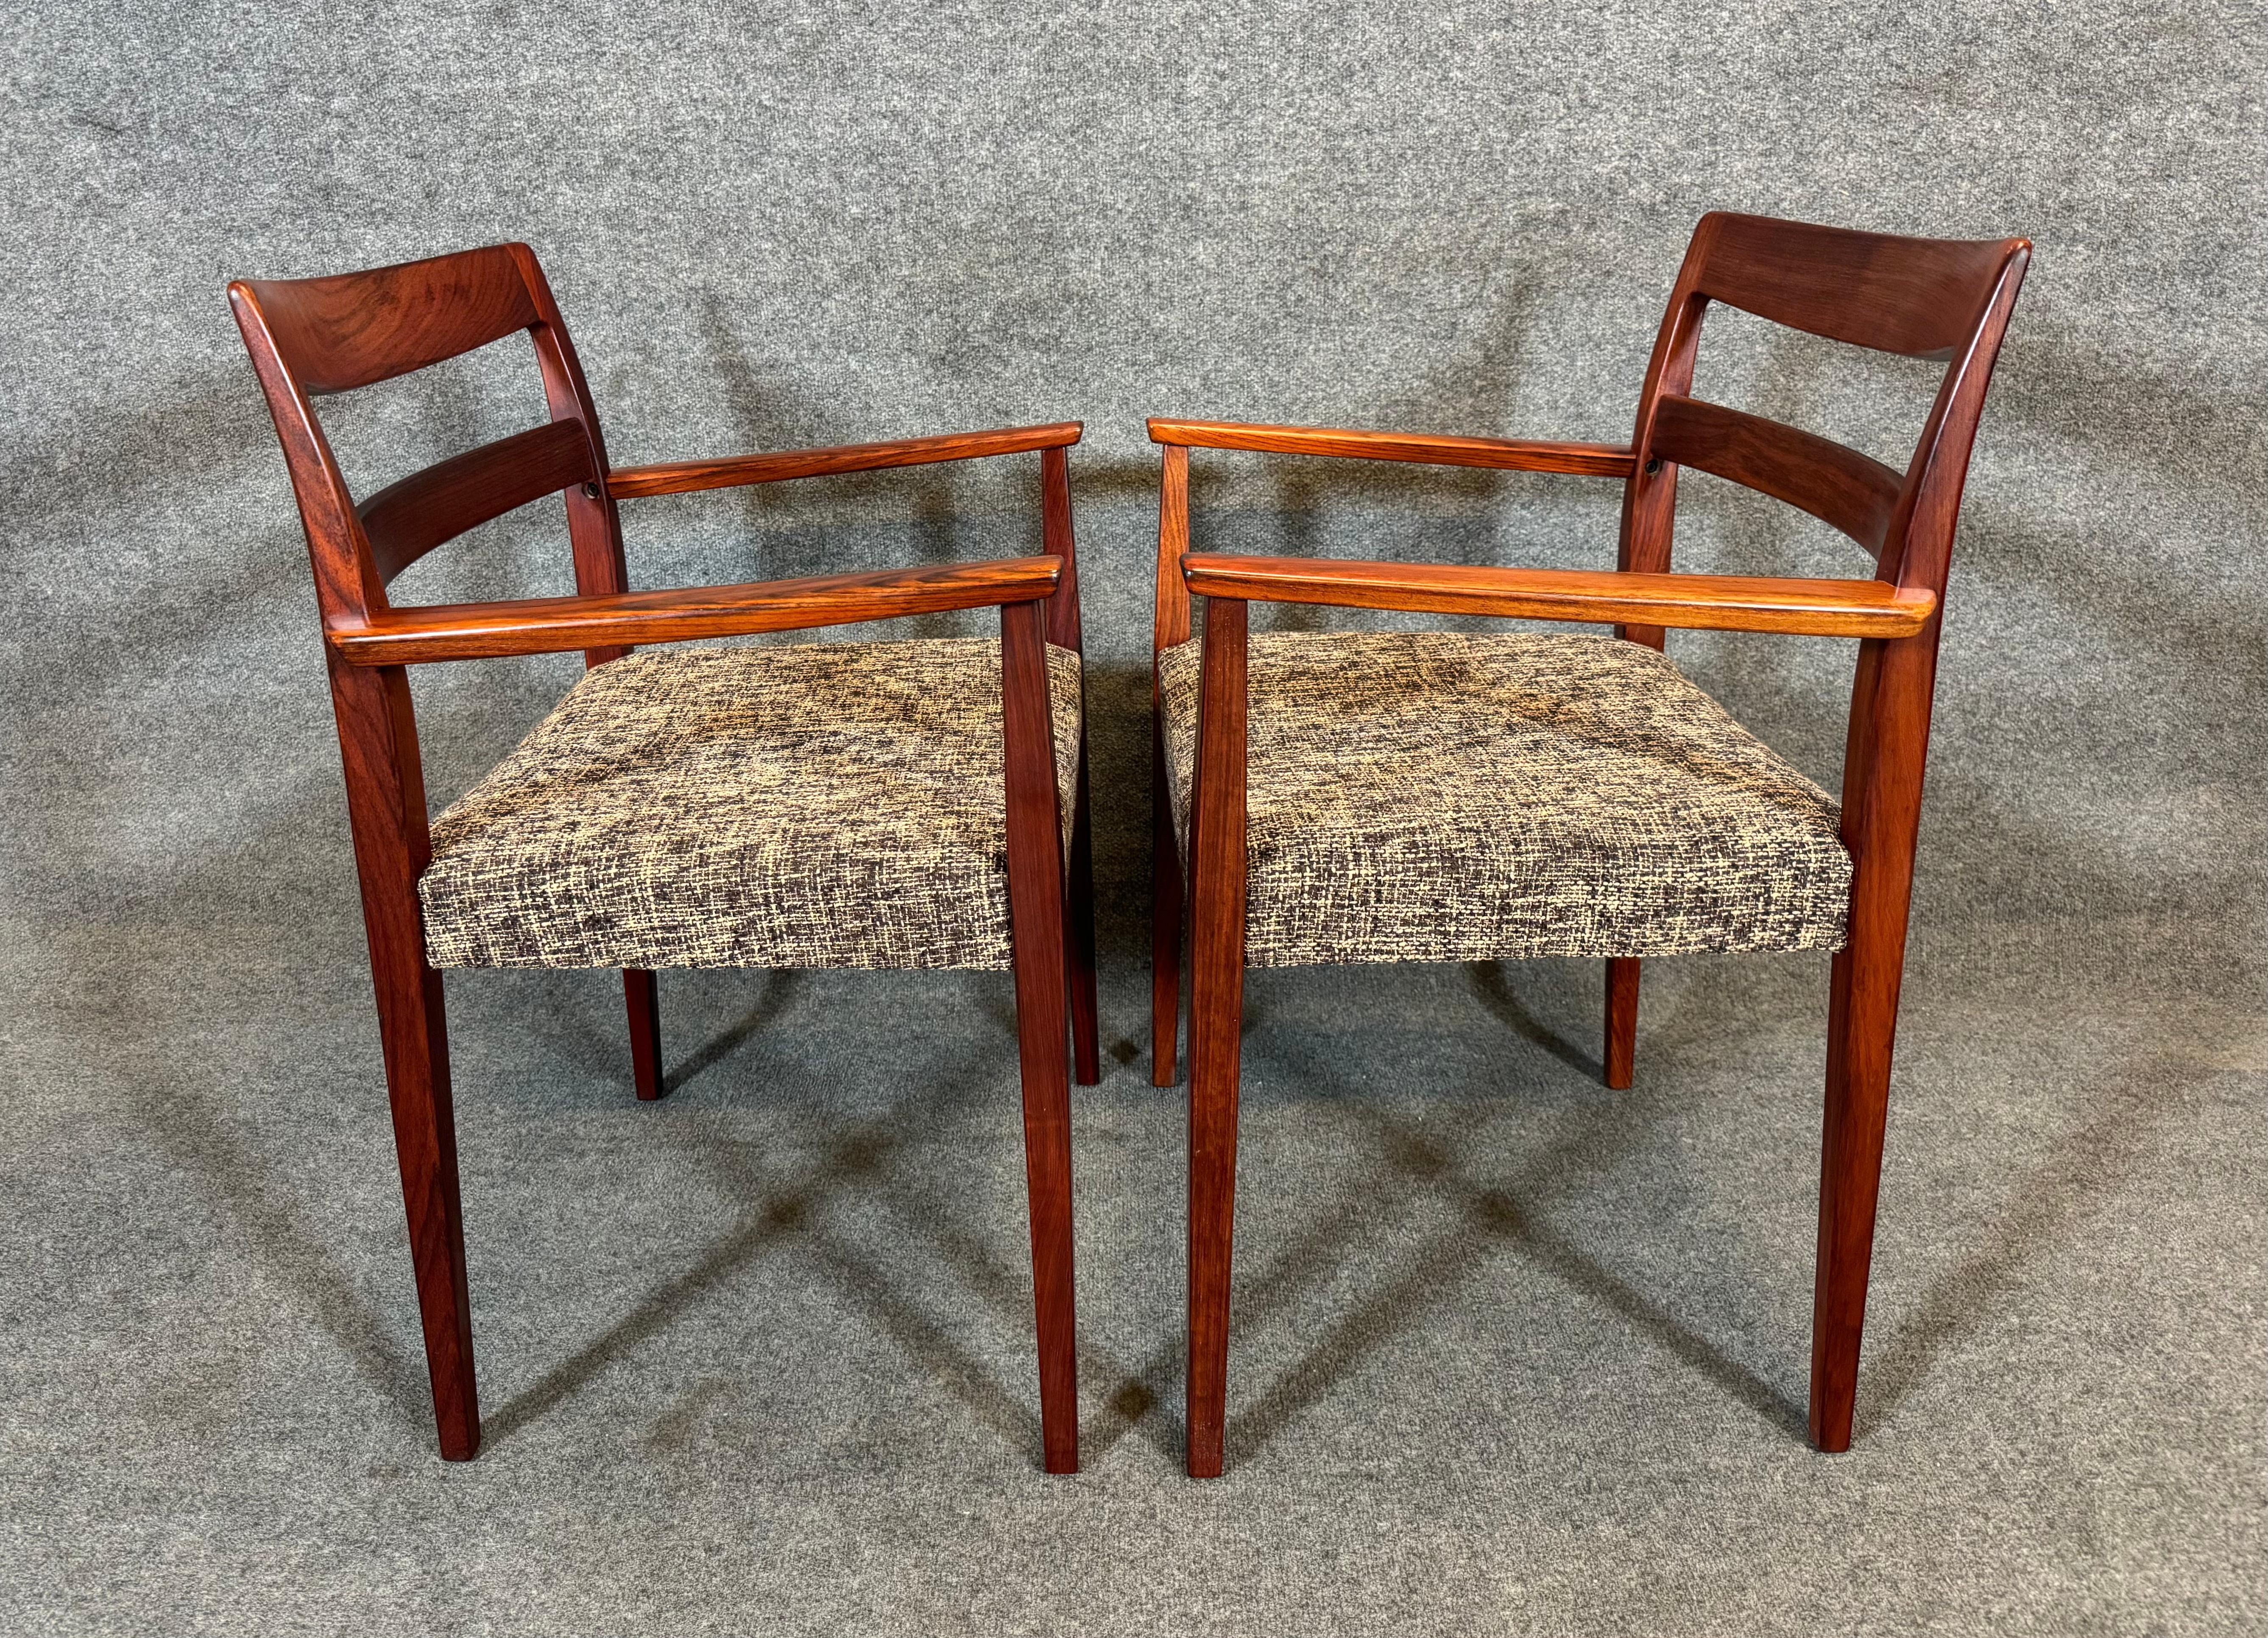  8 Vintage Danish Mid Century Rosewood Dining Chairs 